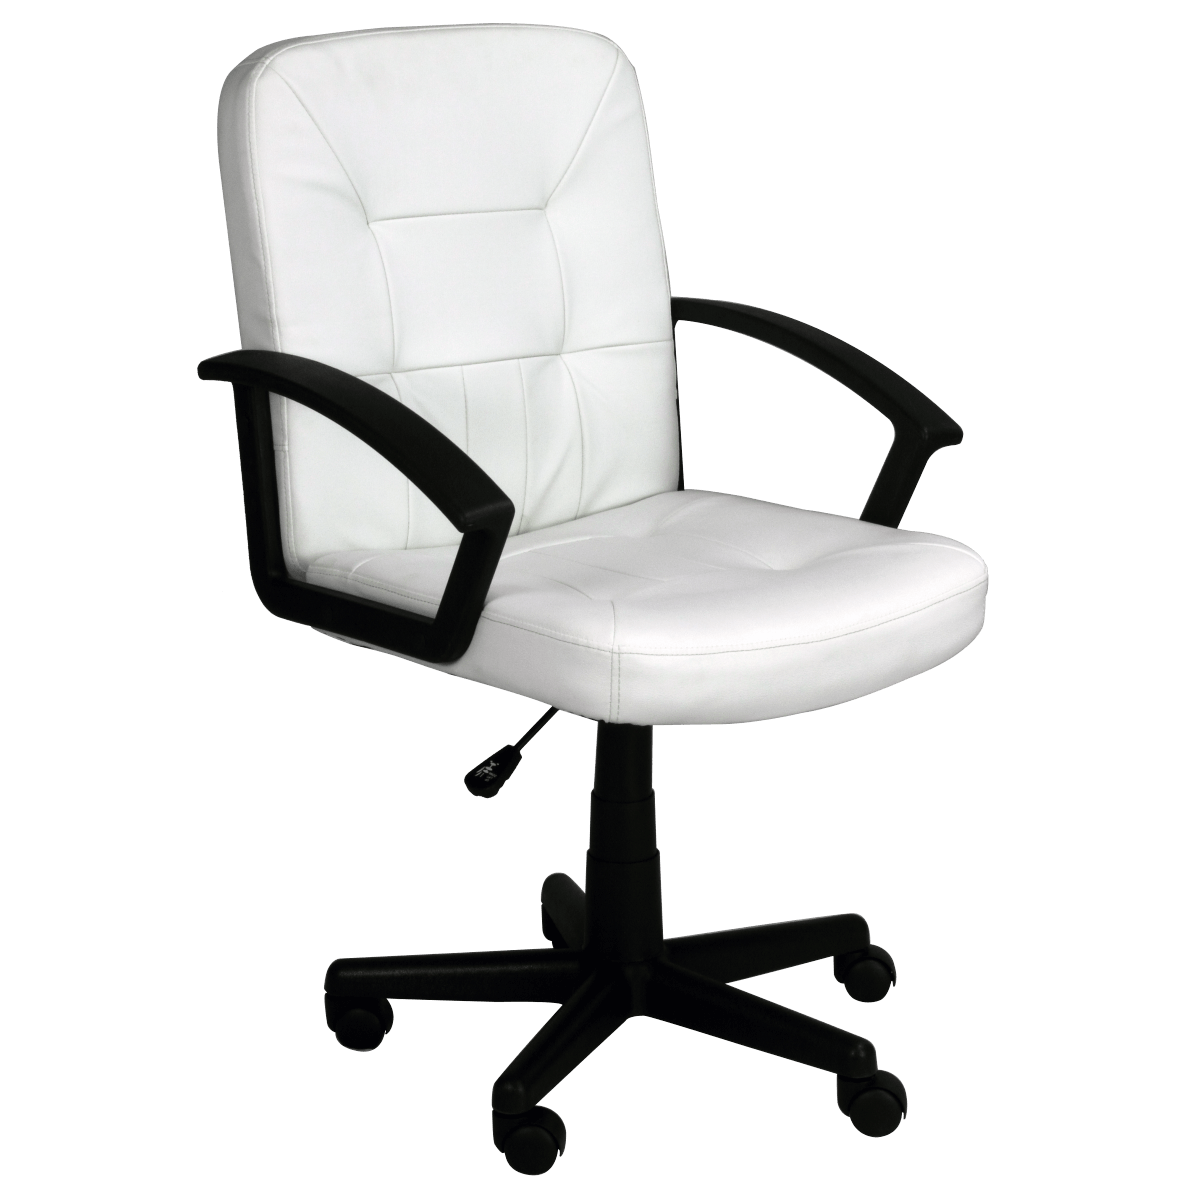 Download Office Chair Png Image HQ PNG Image | FreePNGImg